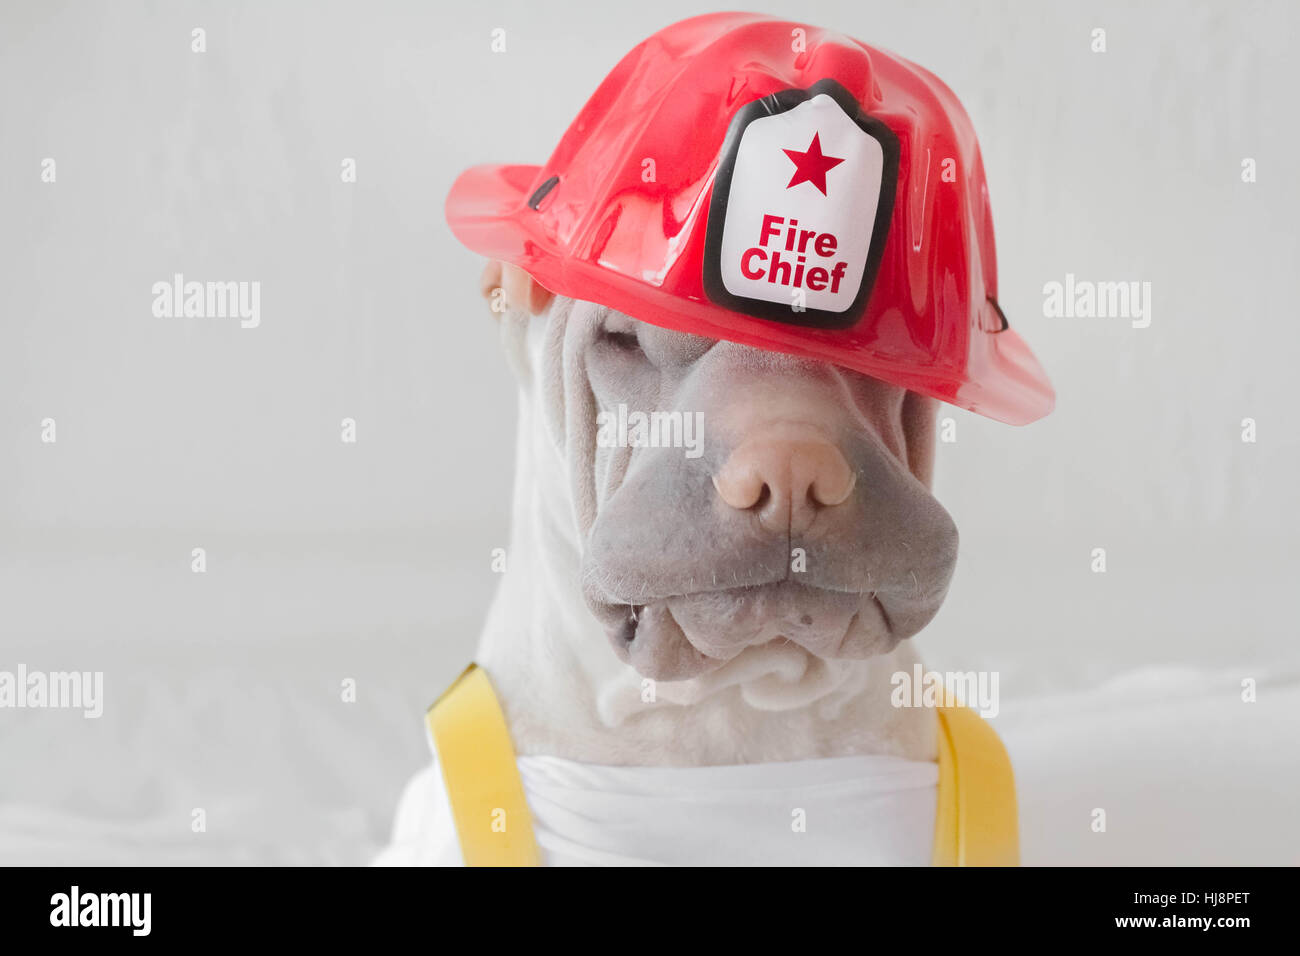 Shar pei dog dressed as a fire chief Stock Photo